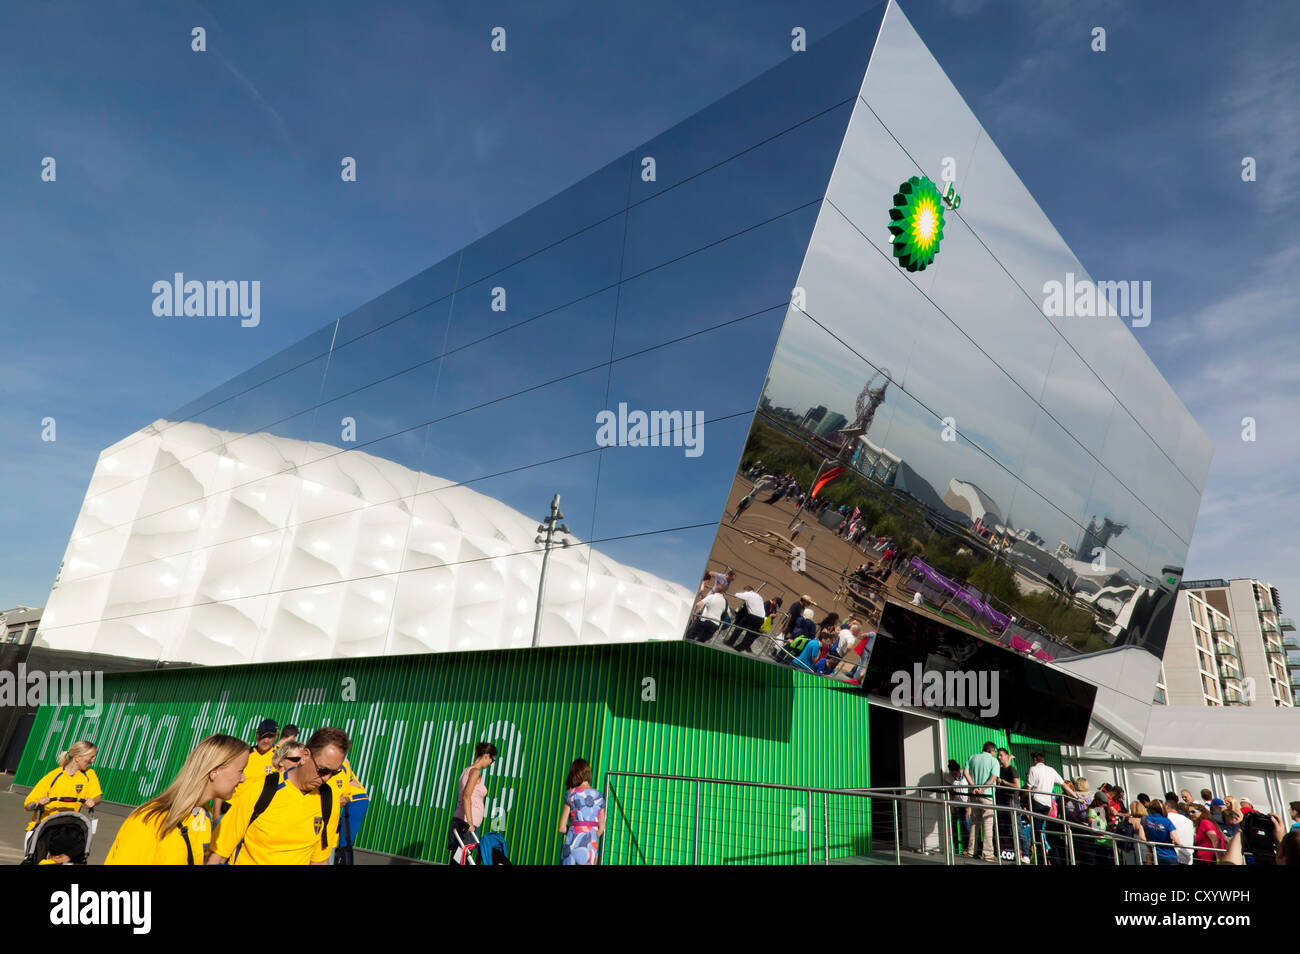 View of BP's mirrored box pavilion. Its showcase building at the Olympic Park, Stratford promoting its new Biofuels. Stock Photo